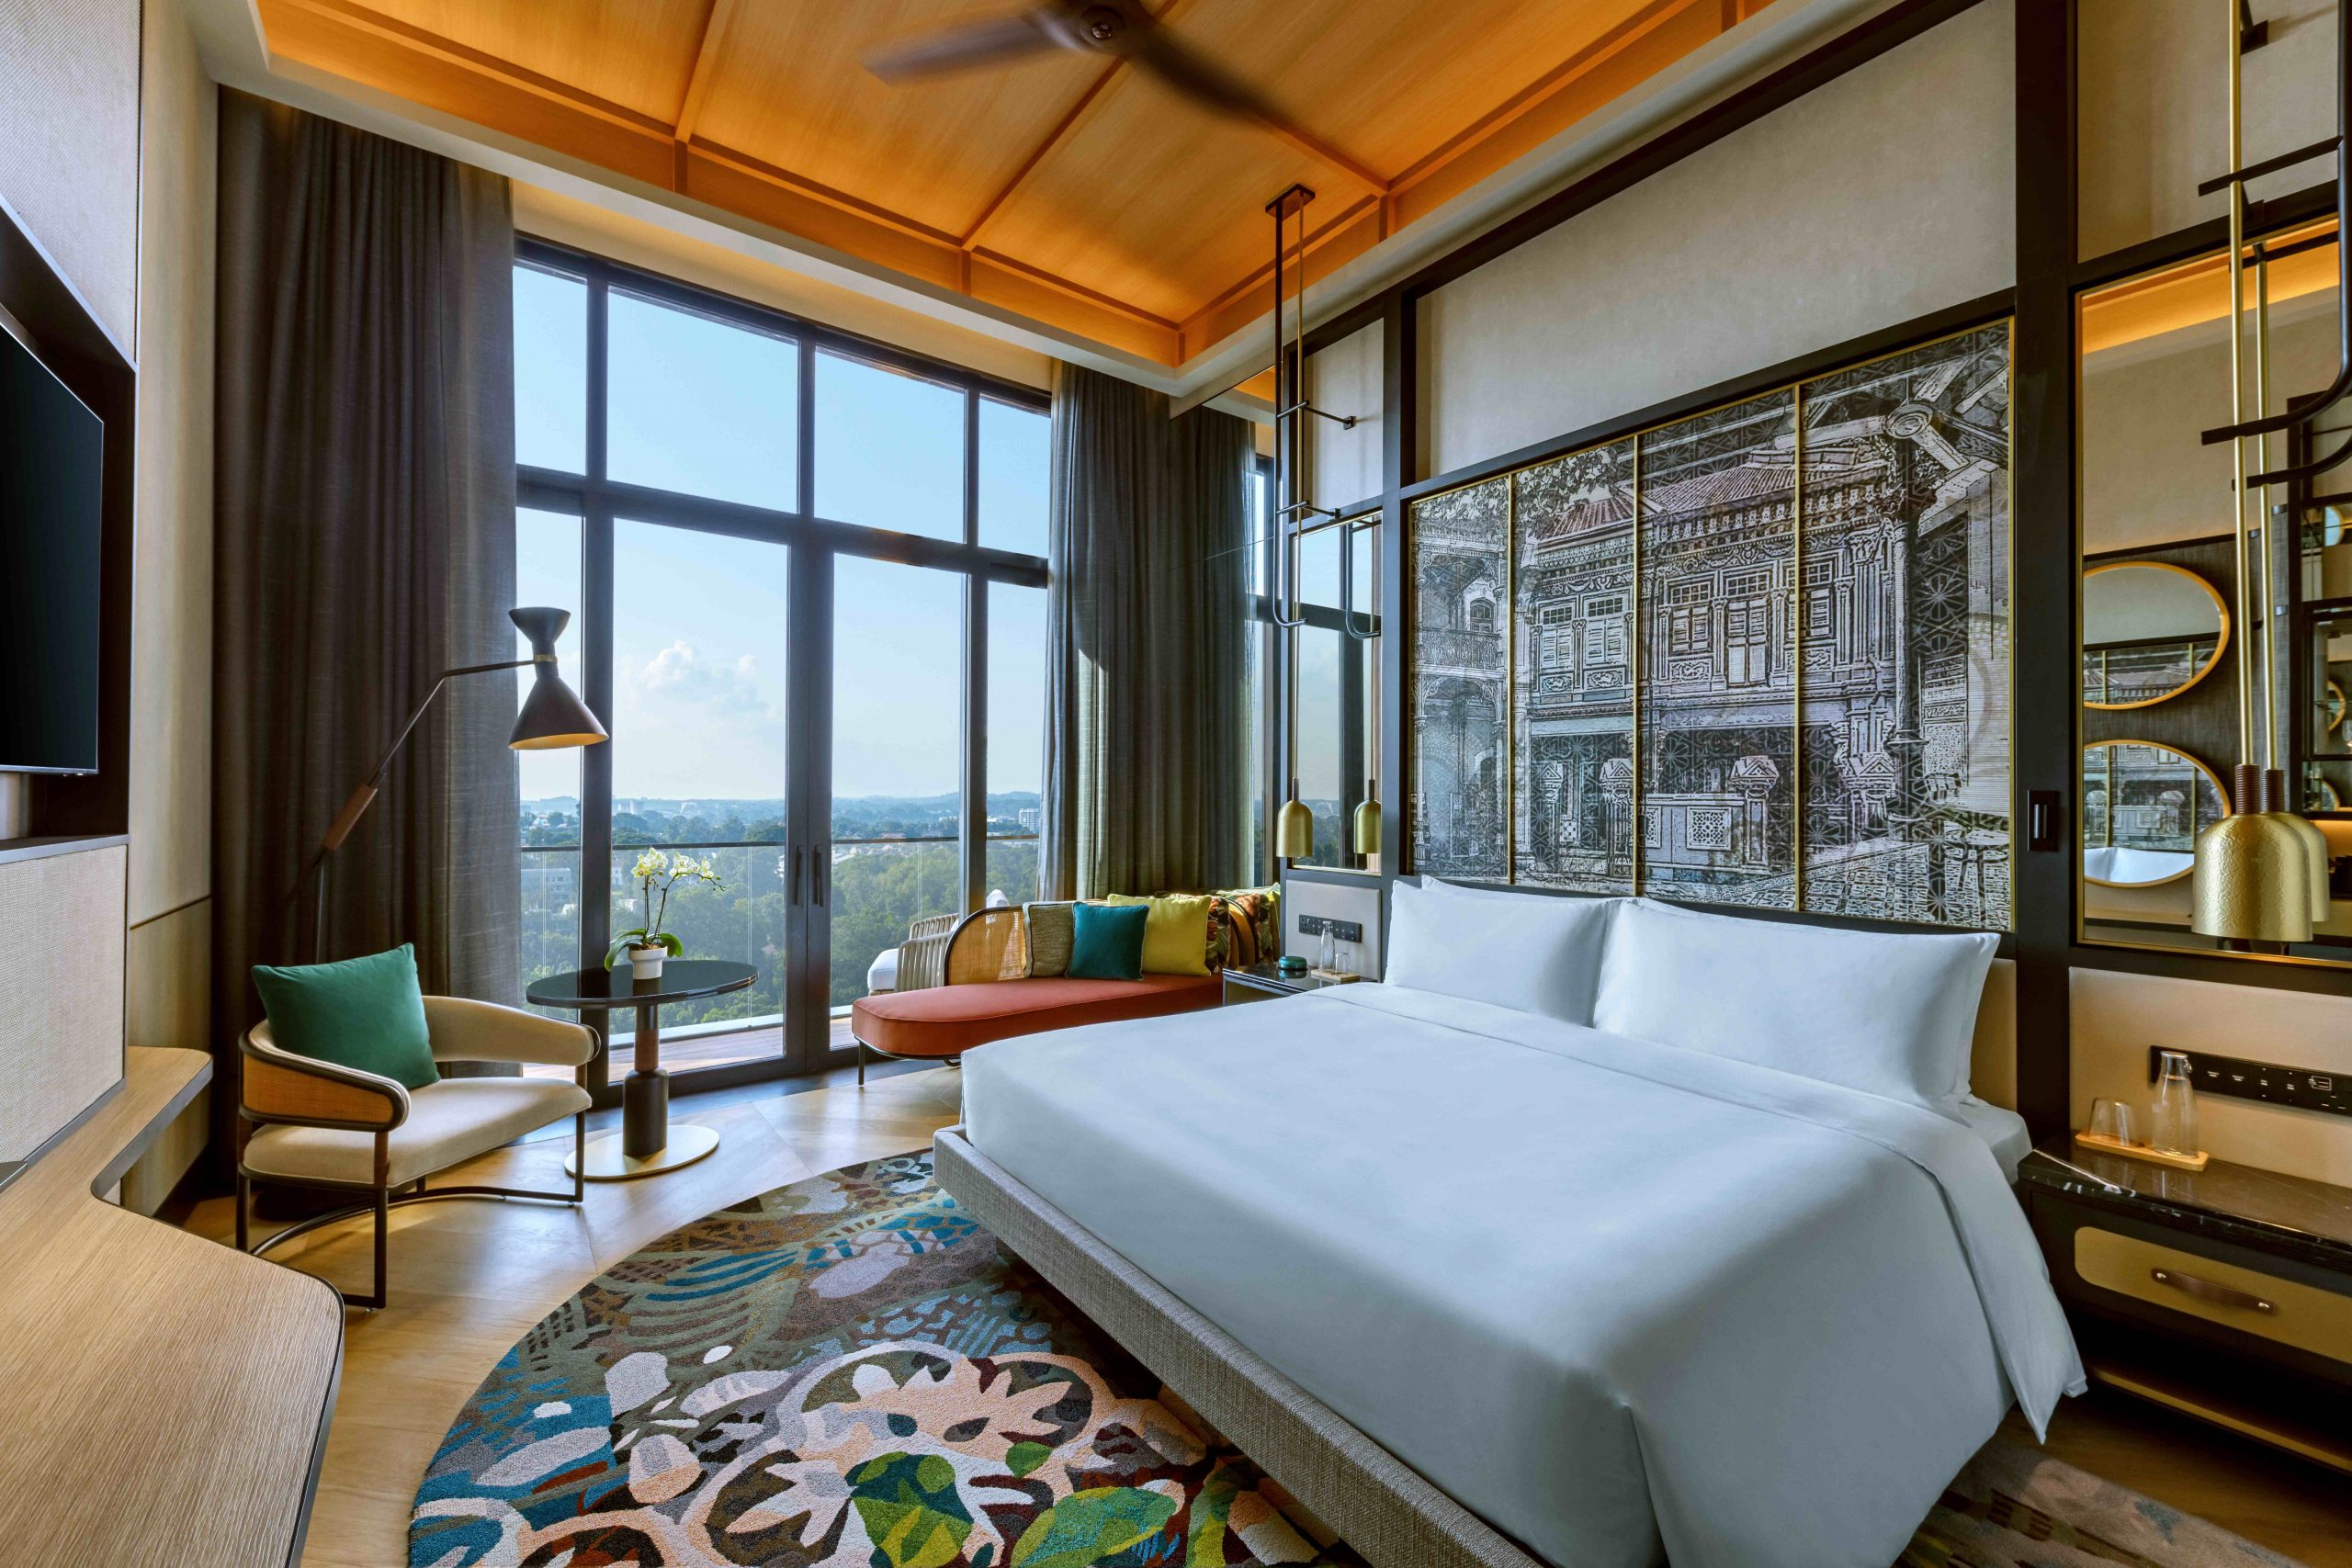 , These hotels are responsible for an Orchard Road revival